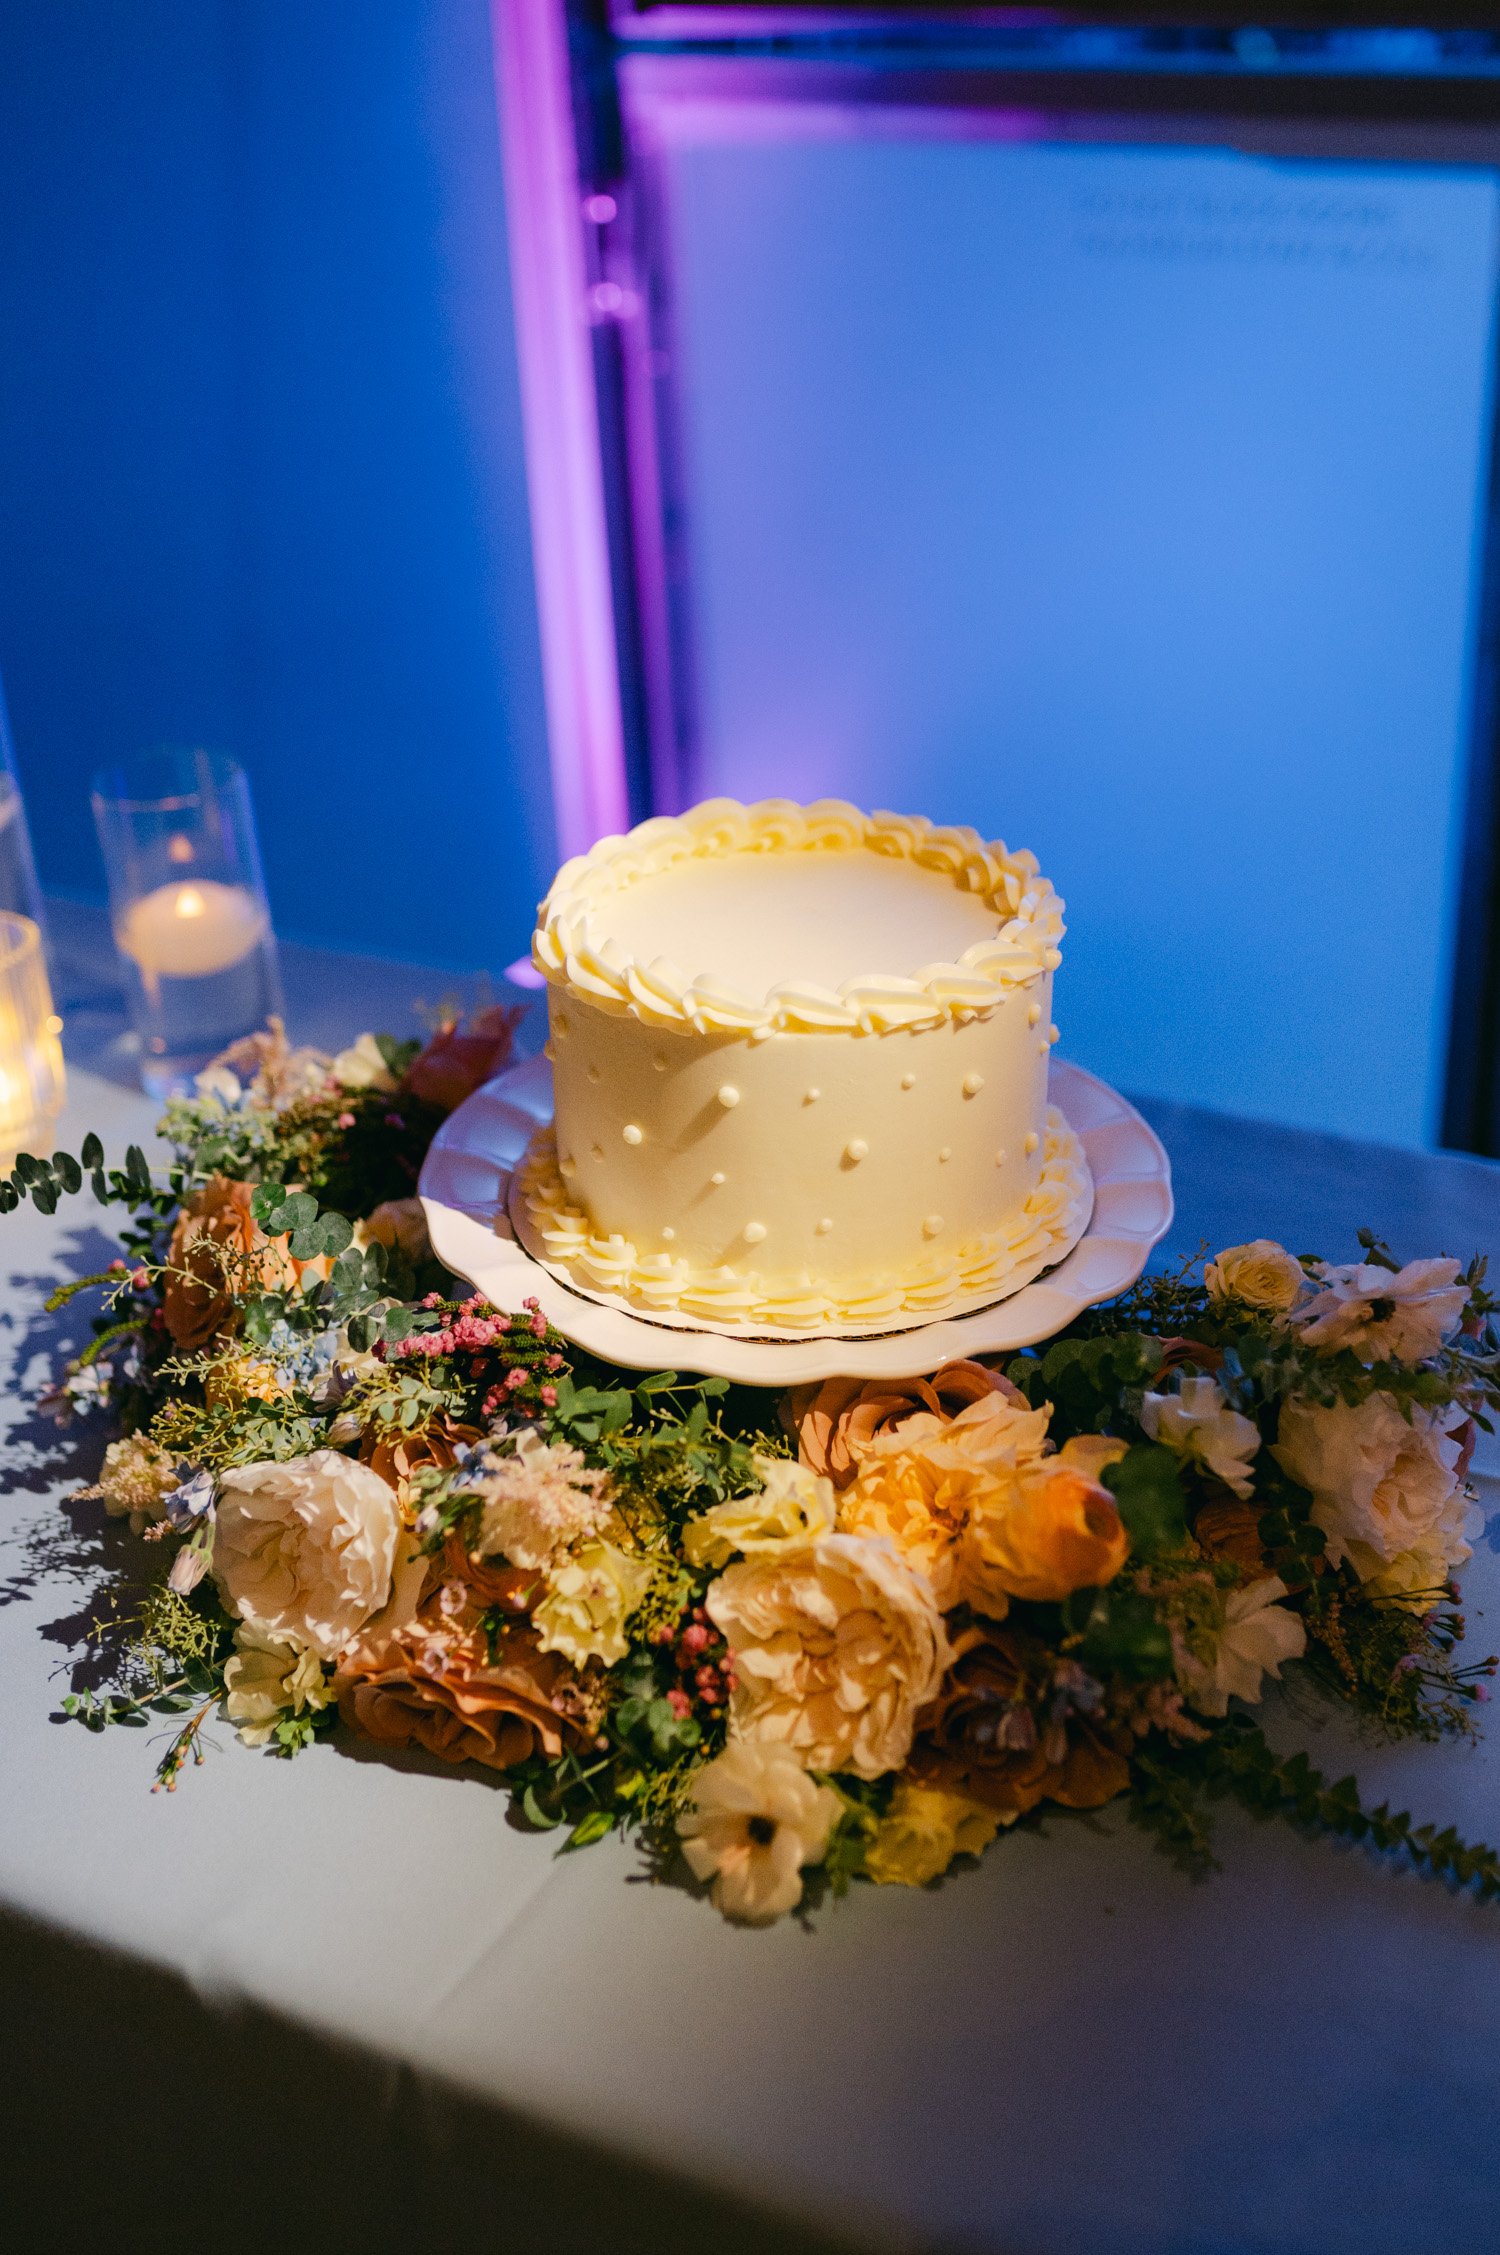 California academy of Sciences in San Francisco Wedding, photo of a minimal 1 layer wedding cake with pearl accents and flowers surrounding the table